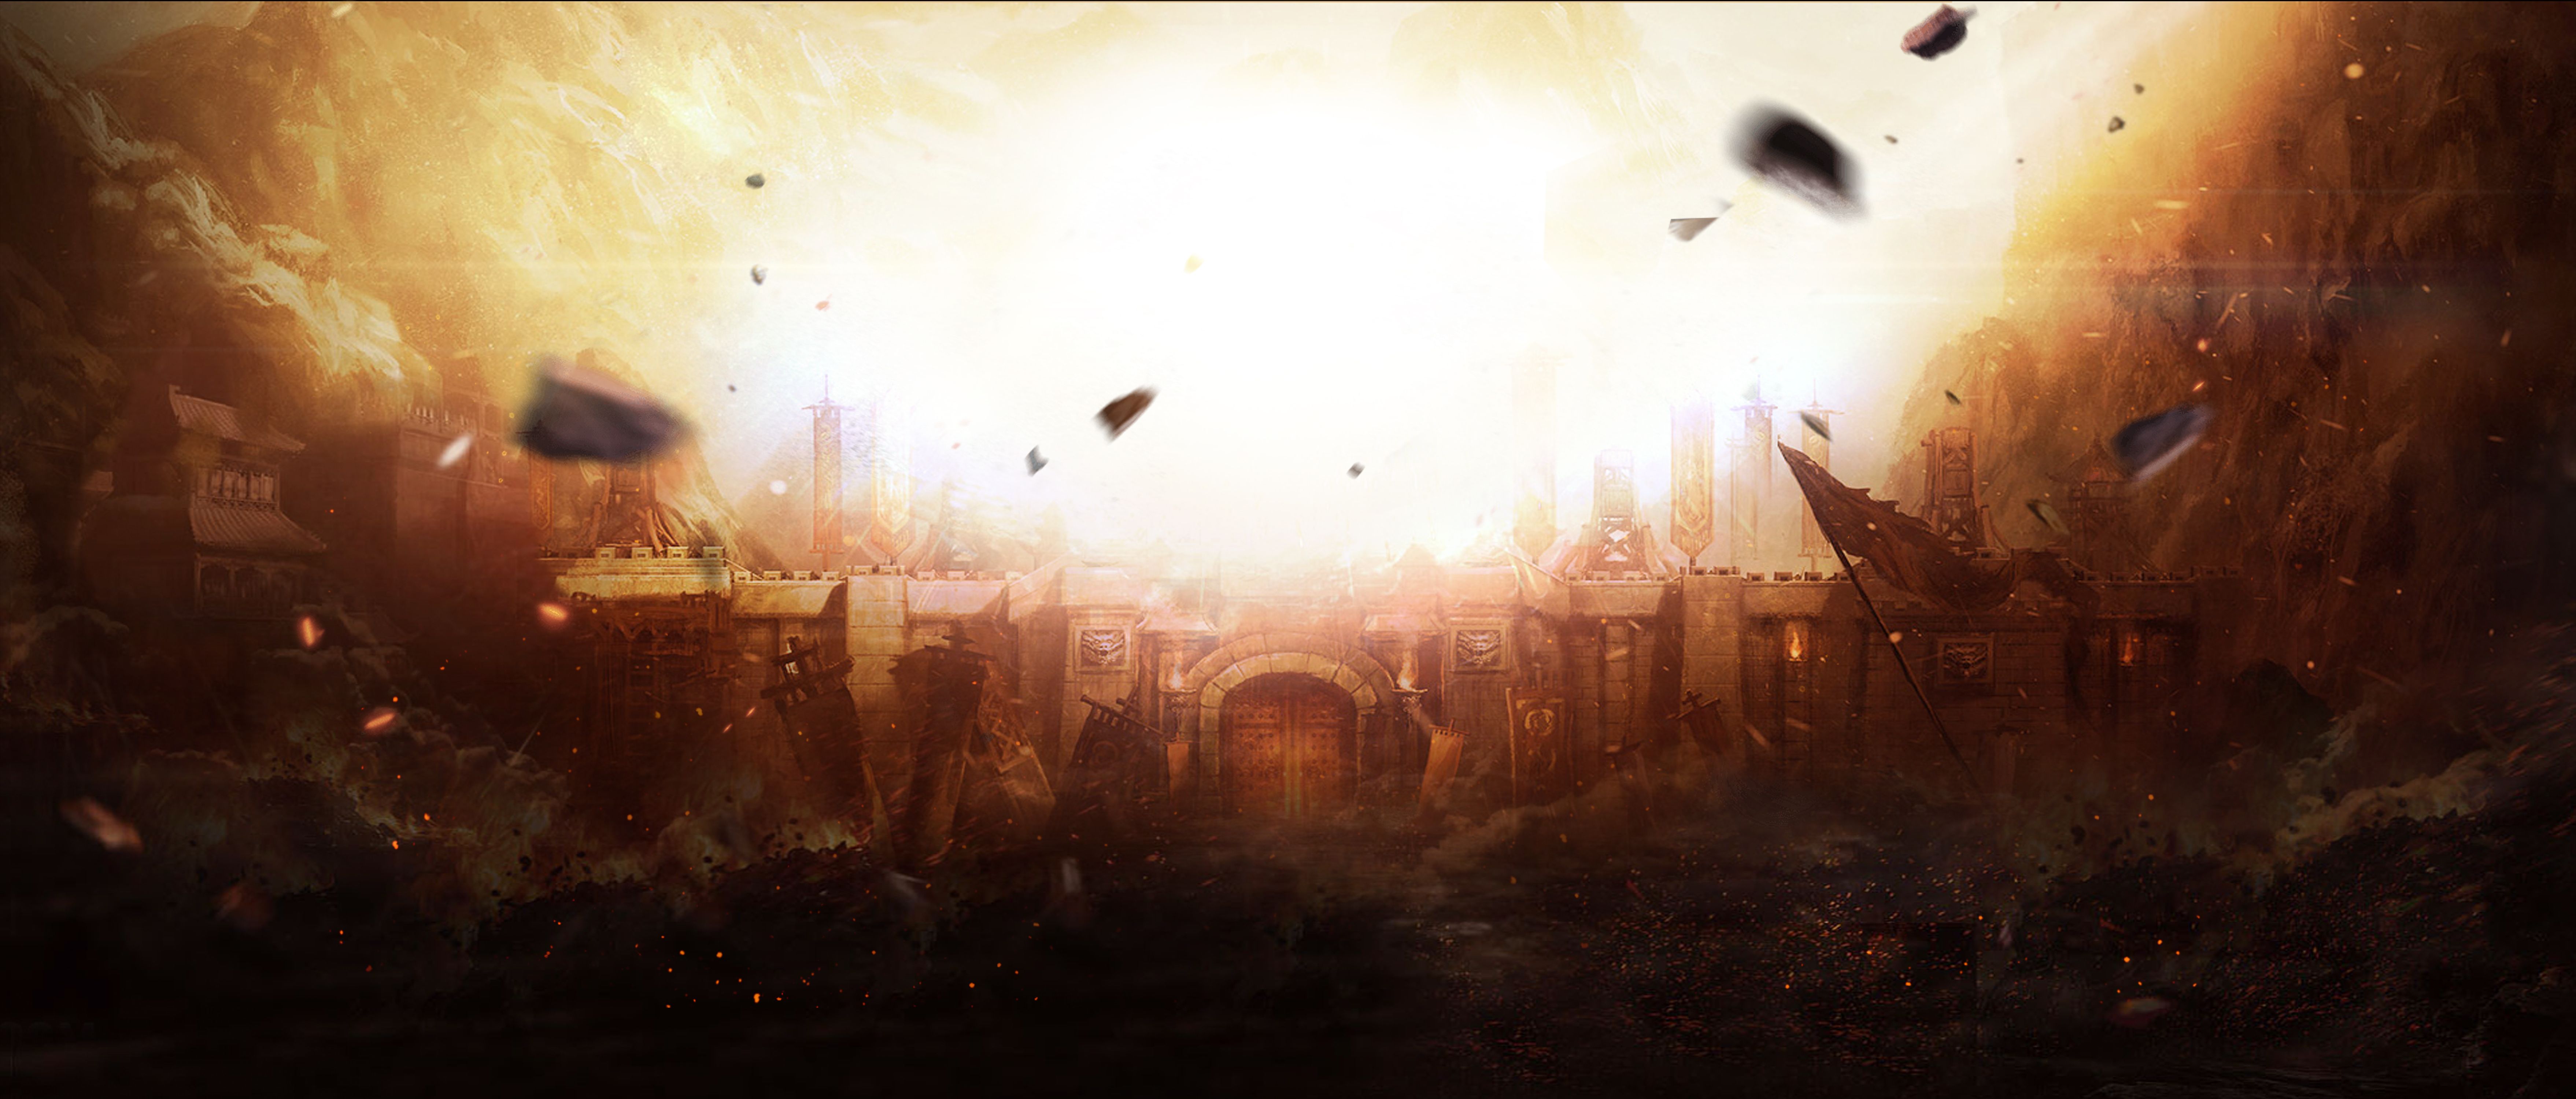 7031x3000 Ancient War Games Posters Banner Background Image Light Background Image Background Image